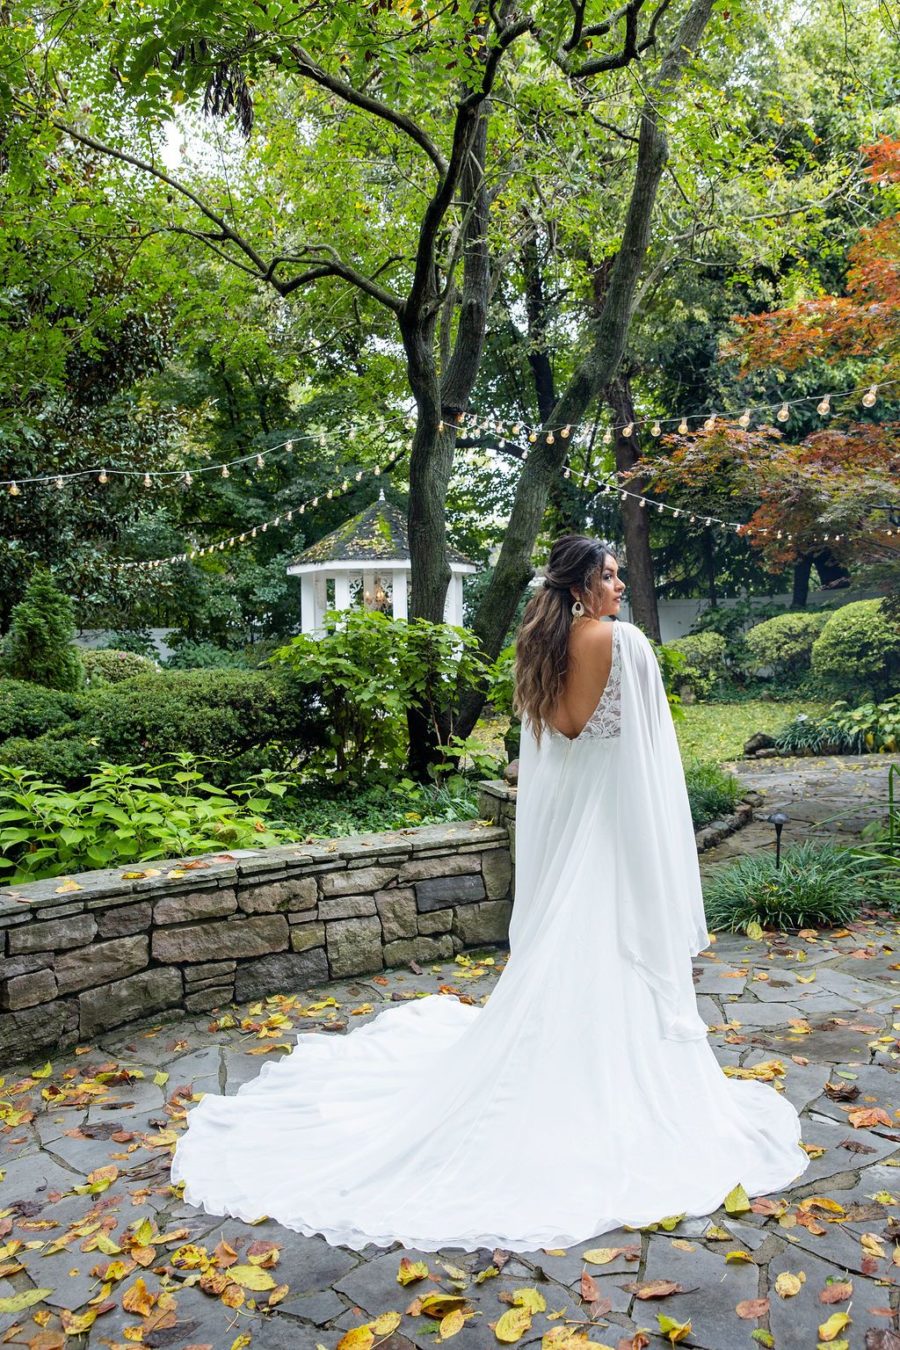 Jewel’s bridal look brought serious goddess vibes with her bespoke gown by designer Lis Simone.